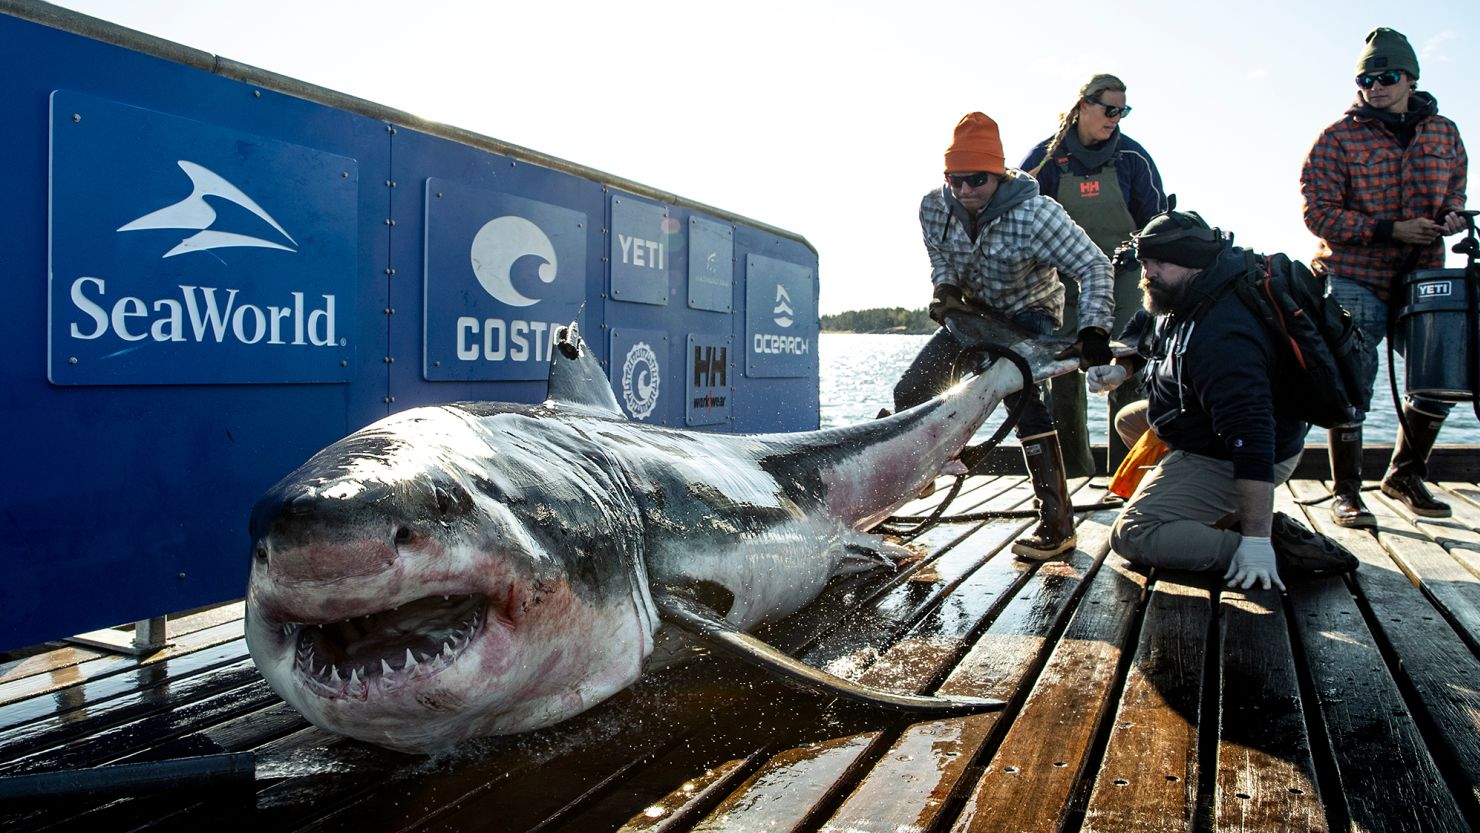 There's a 1,000-pound great white shark swimming near the Jersey